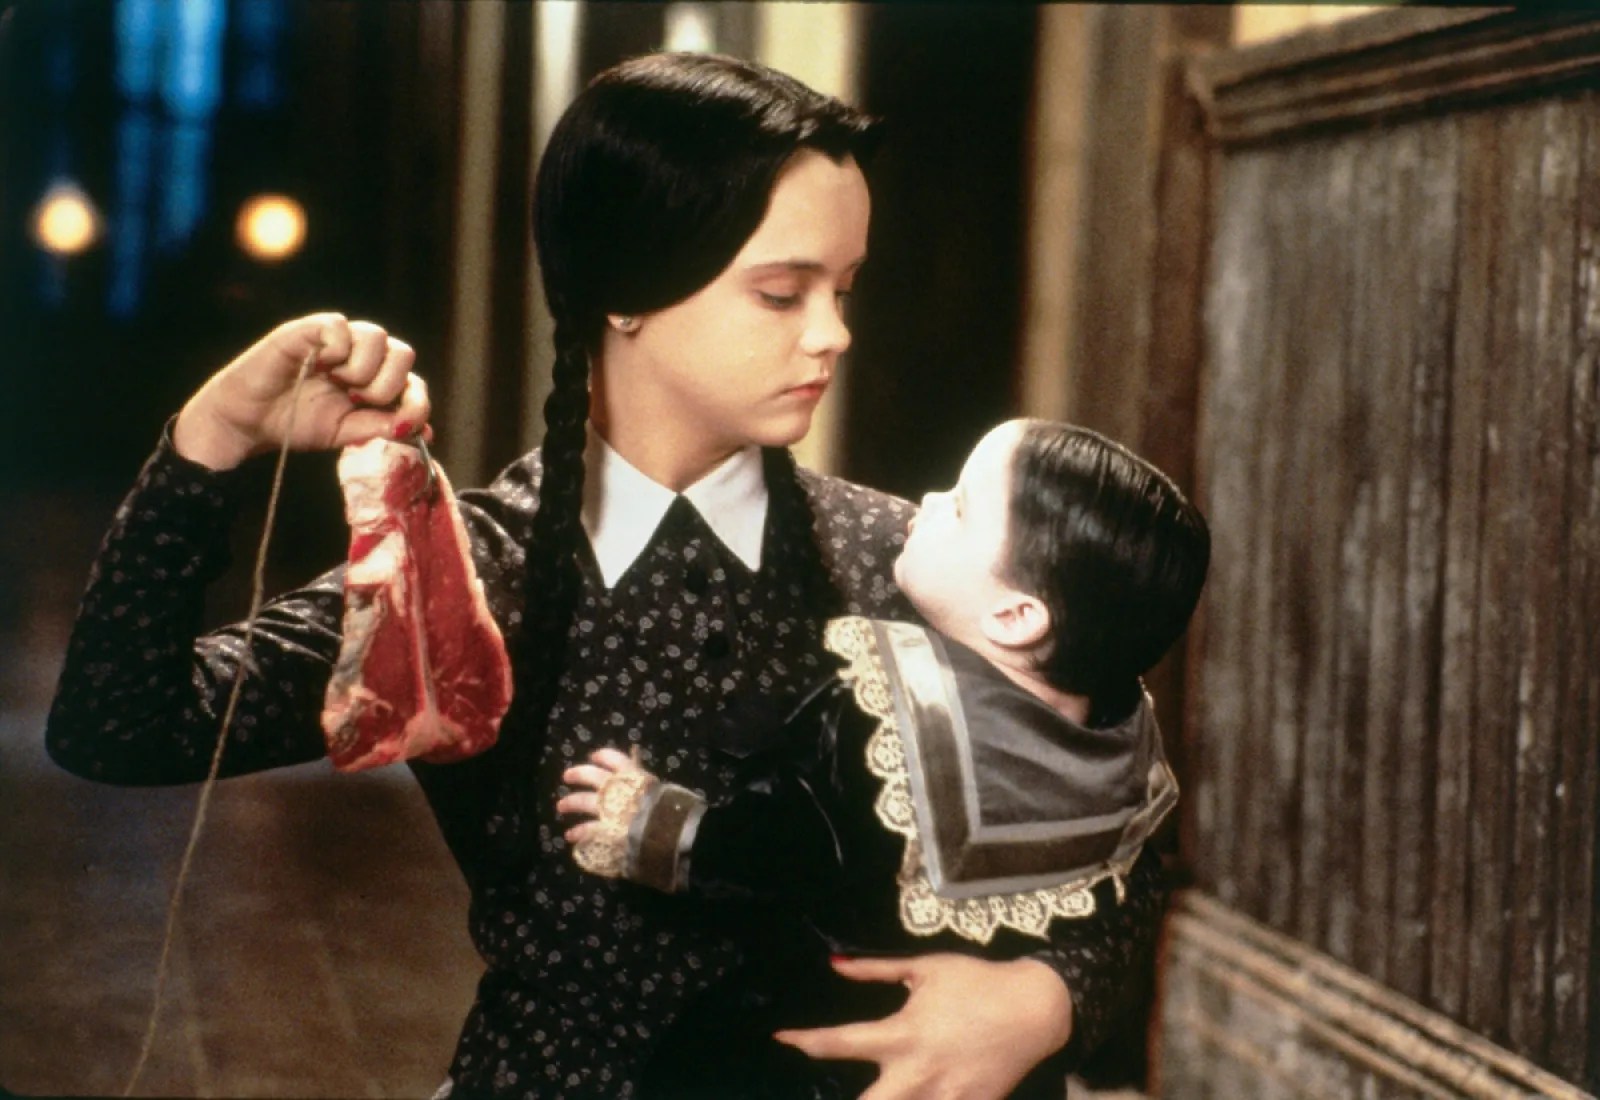 Wednesday and Pubert Addams in Addams Family Values